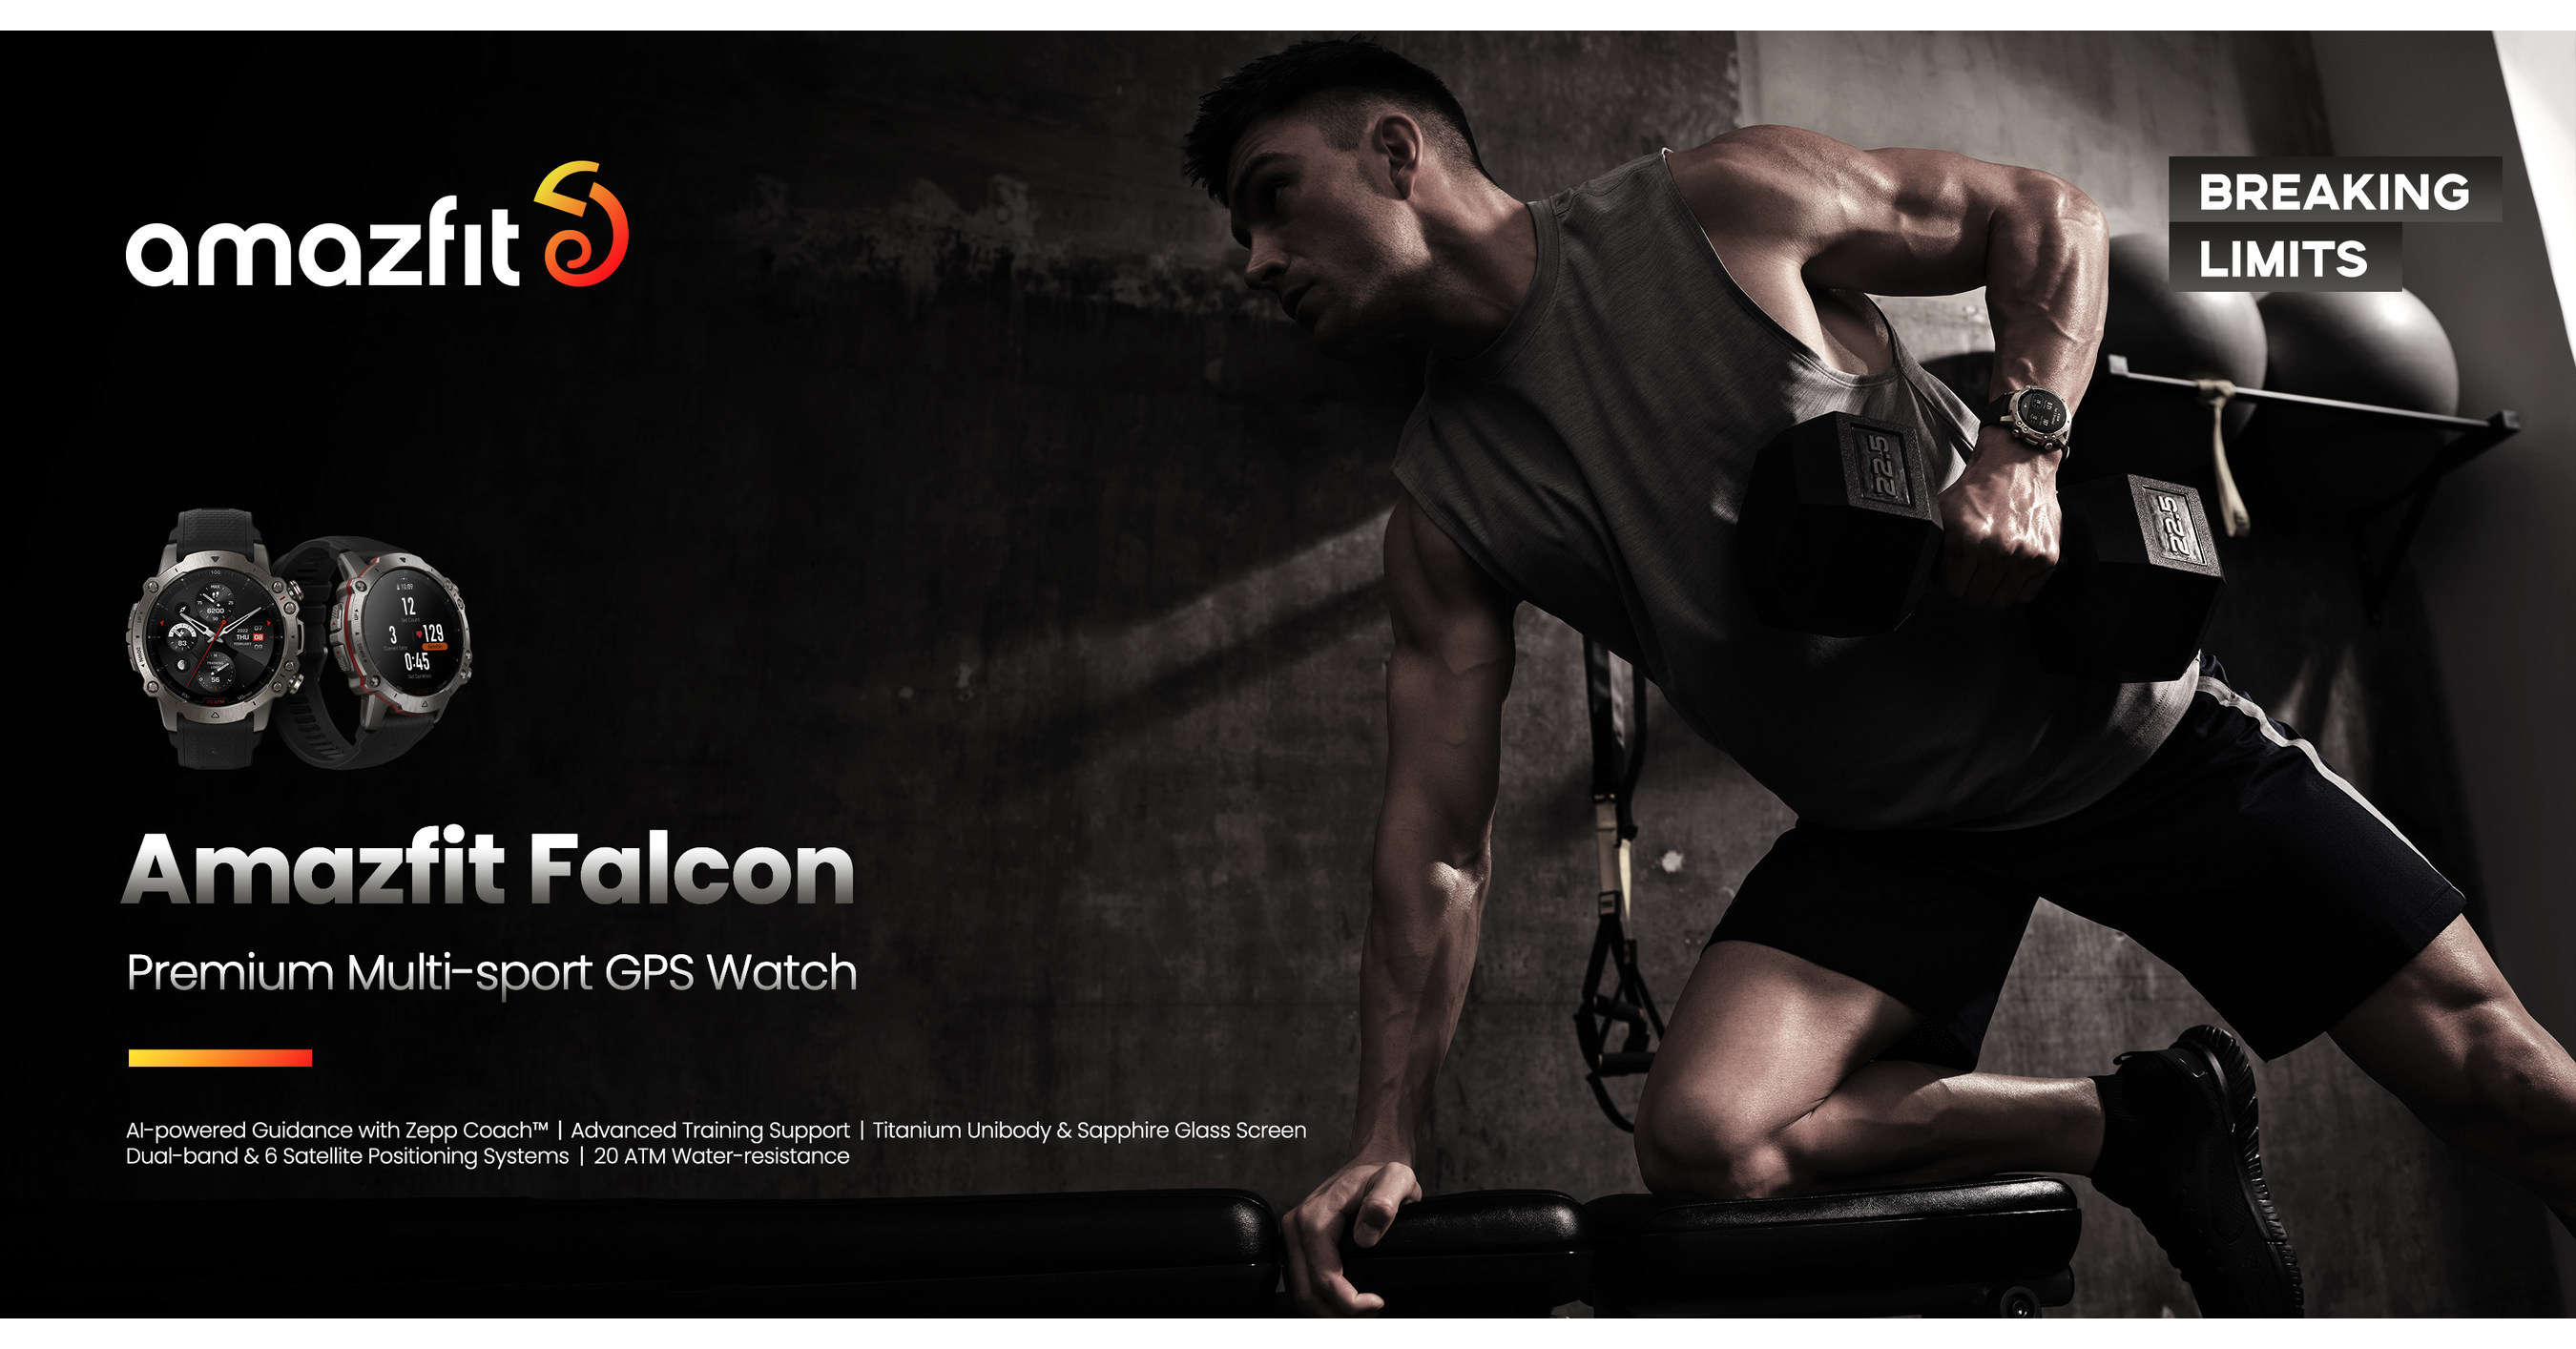 Amazfit launches the Falcon smartwatch, a watch designed to break limits -  PhoneArena